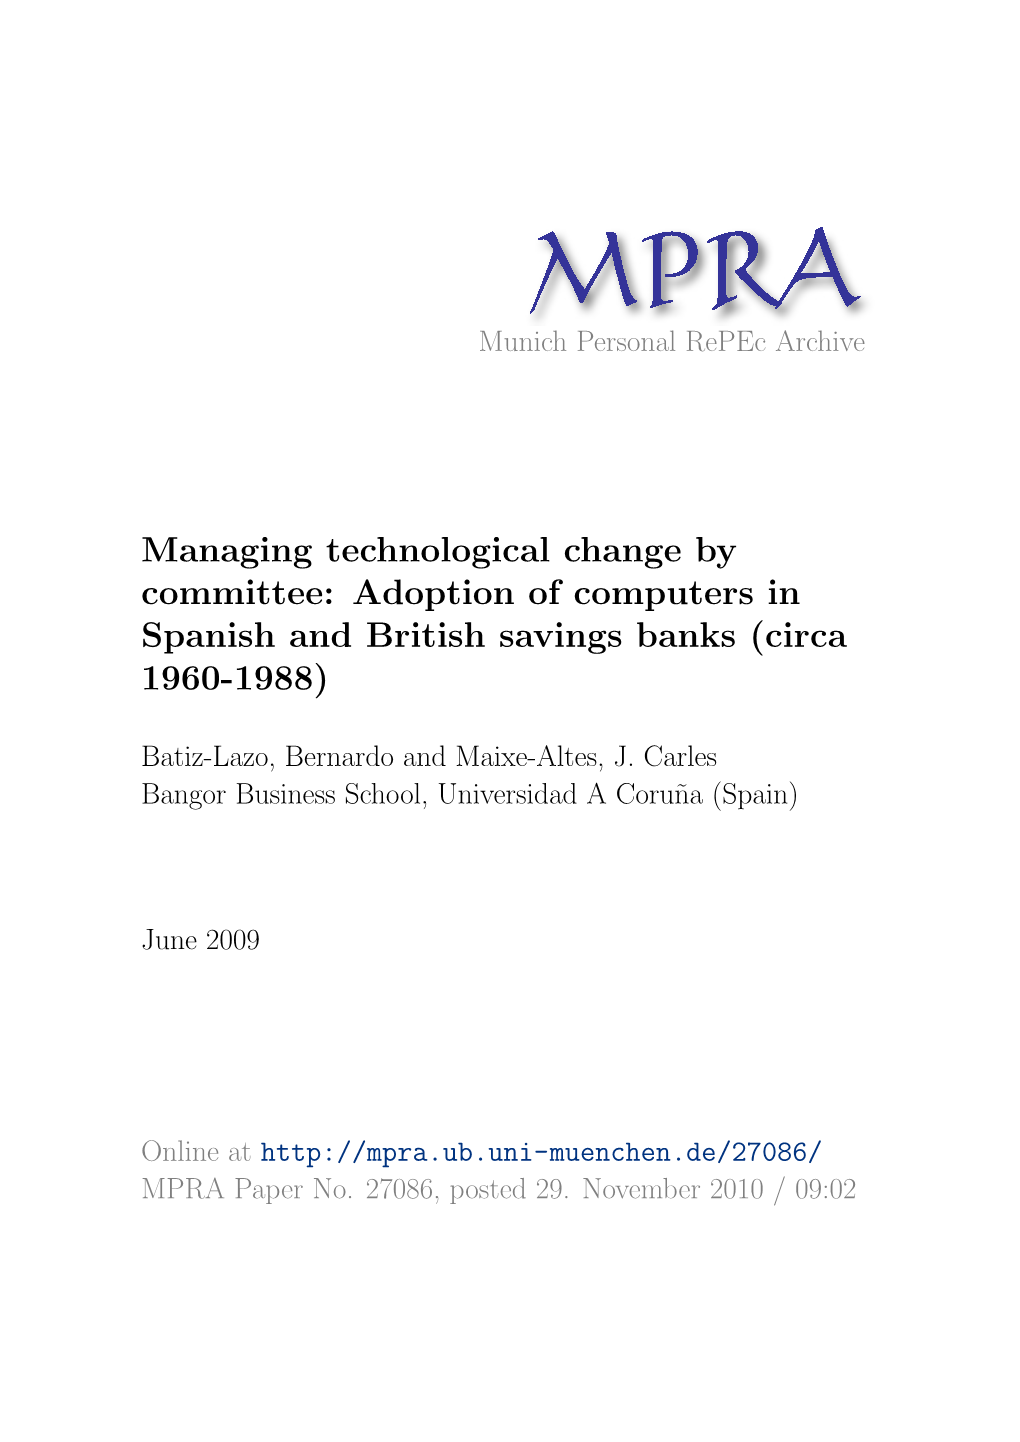 Managing Technological Change by Committee: Adoption of Computers in Spanish and British Savings Banks (Circa 1960-1988)